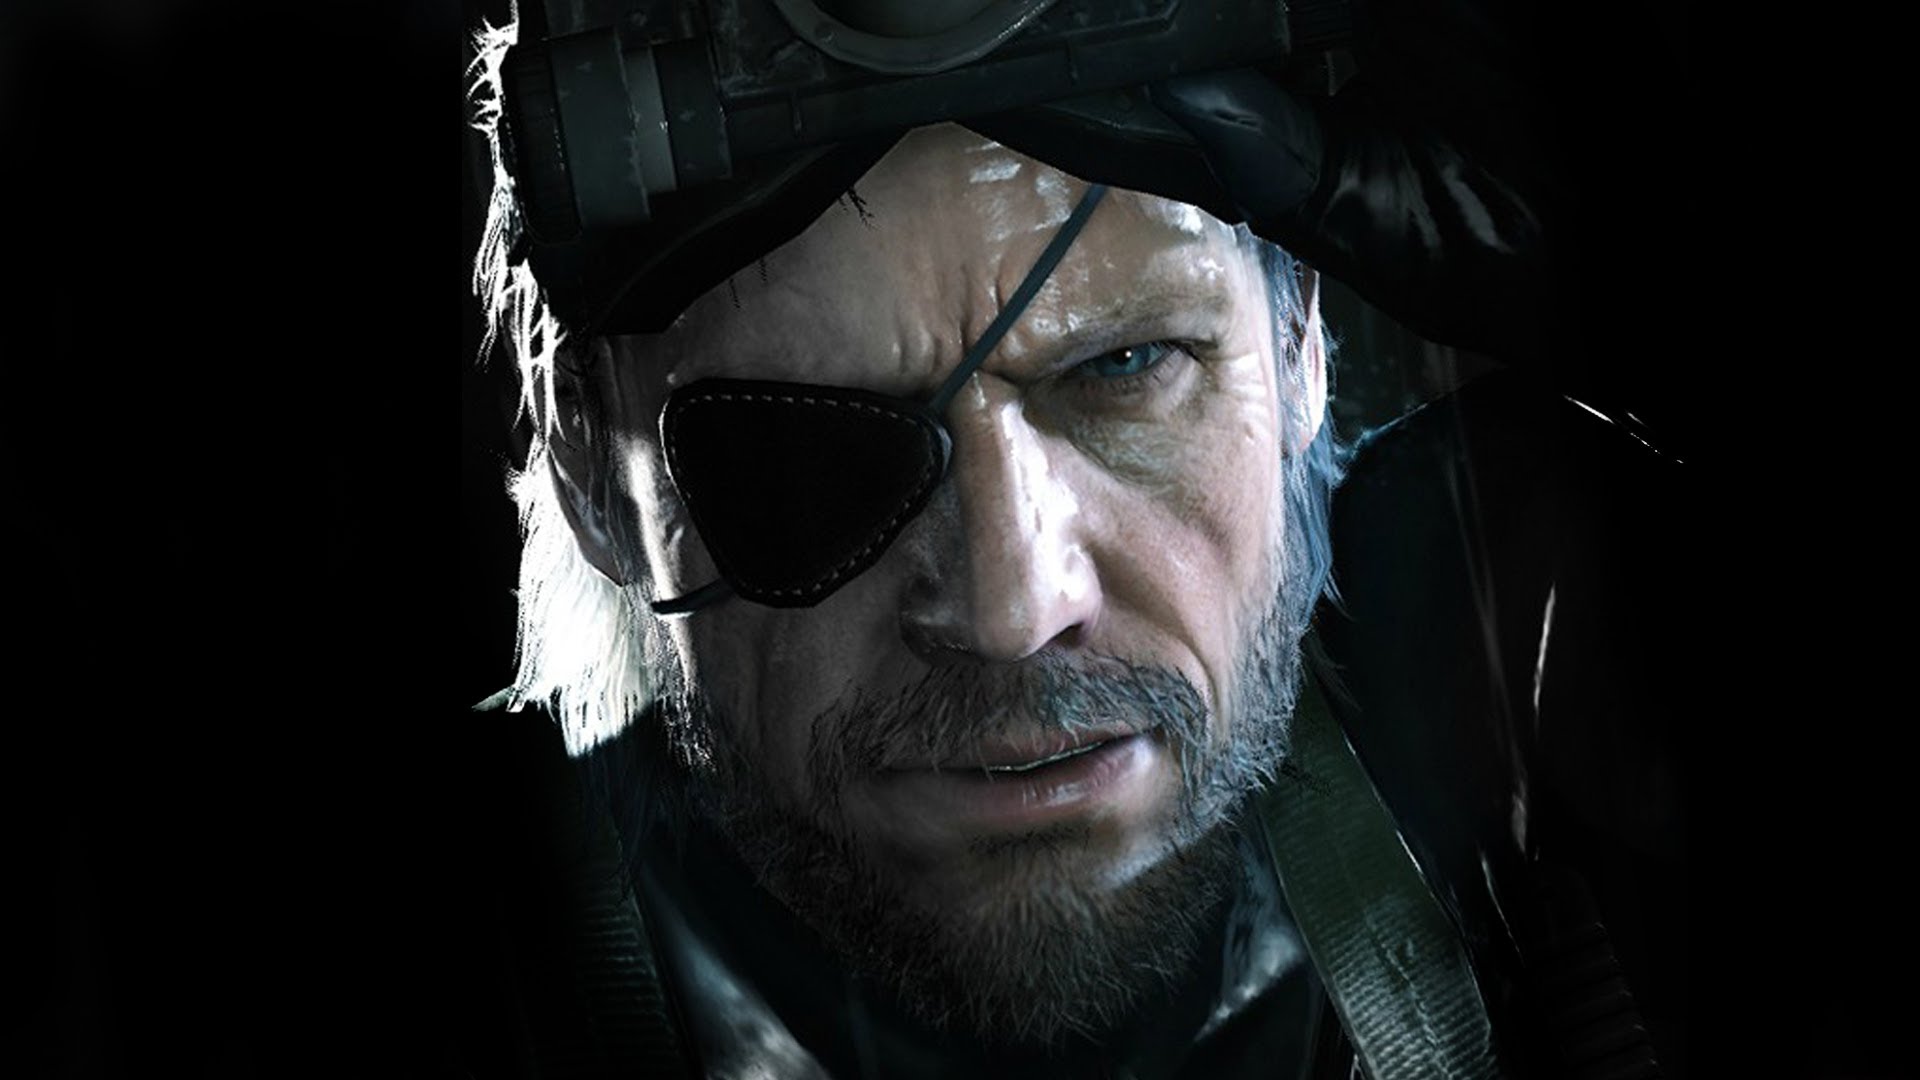 Pain E3 Gameplay Trailer Mgs5 Metal Gear Solid V